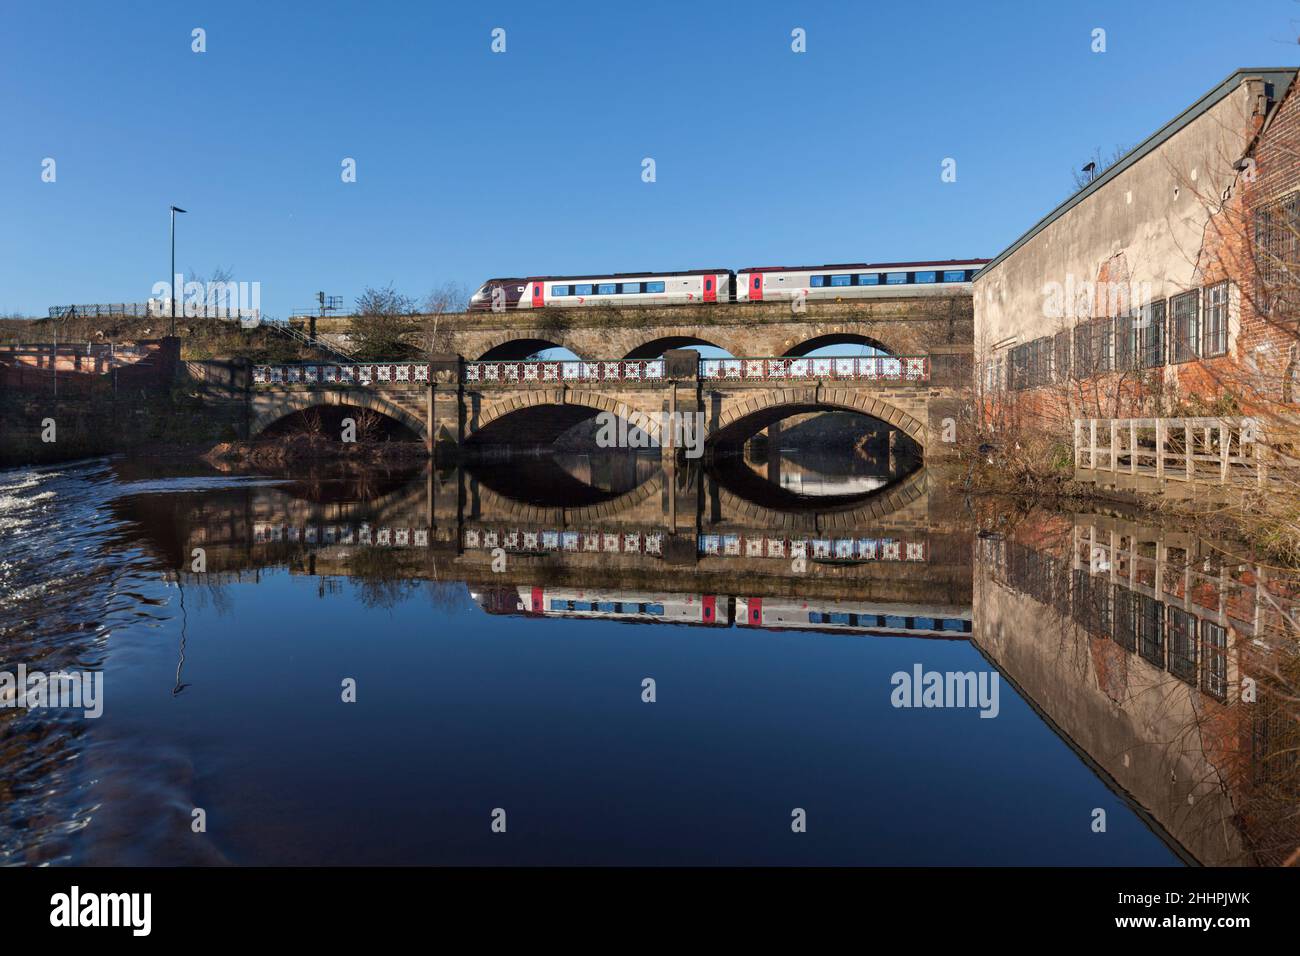 Arriva Crosscountry Trains class 220  train crossing the viaduct at Burton Weir, River Don,  Attercliffe, Sheffield, reflected in the water below Stock Photo